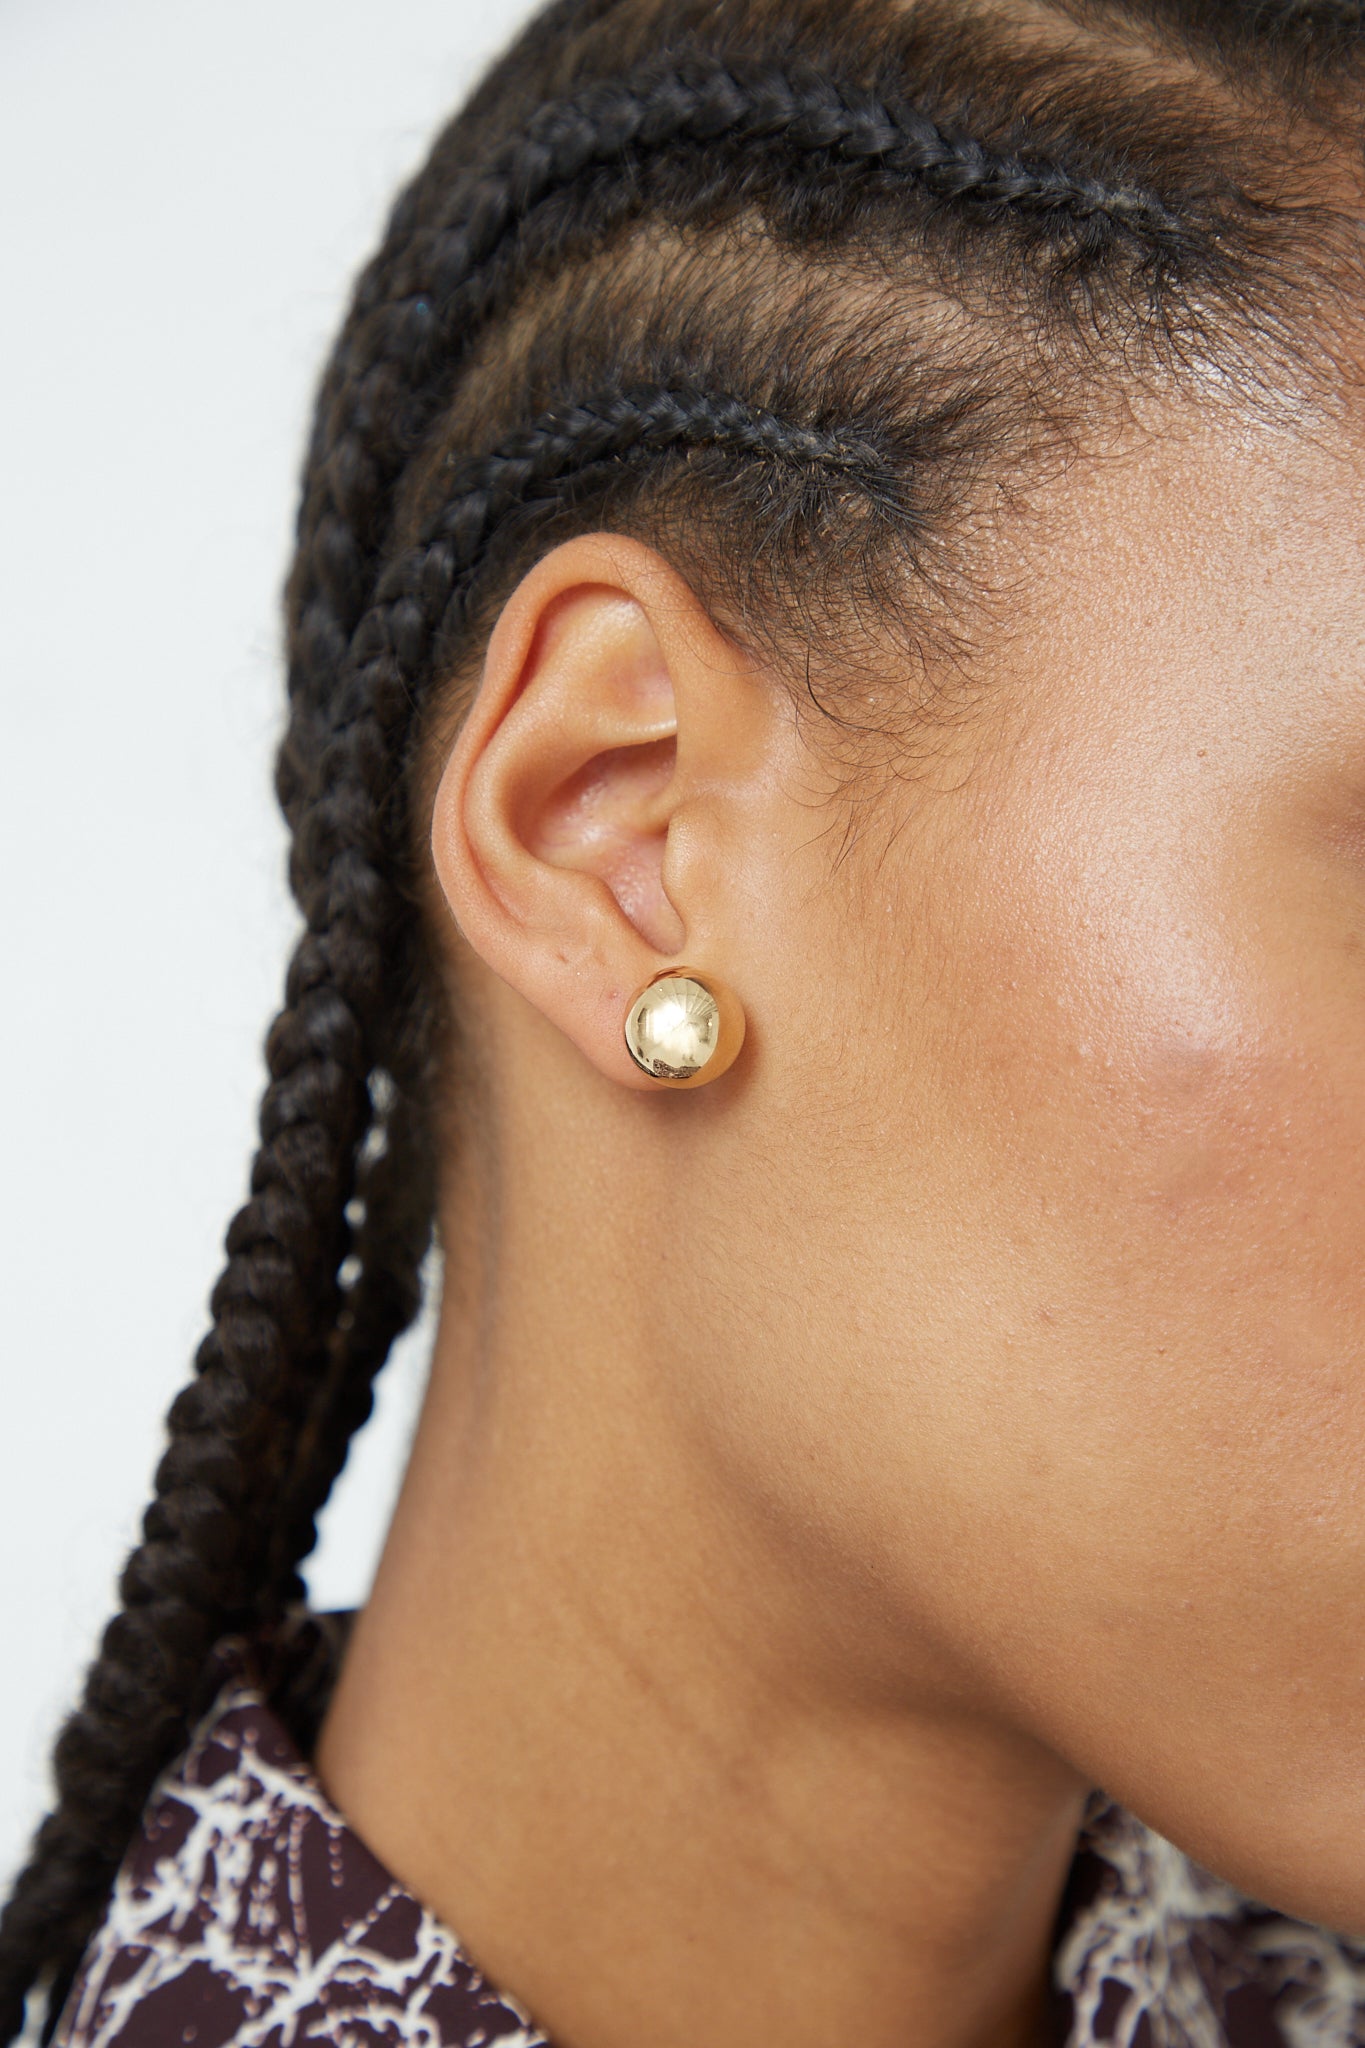 A woman with braided hair wearing the Kathleen Whitaker Sphere Stud Large 12mm Single Earring in 14K Yellow Gold.